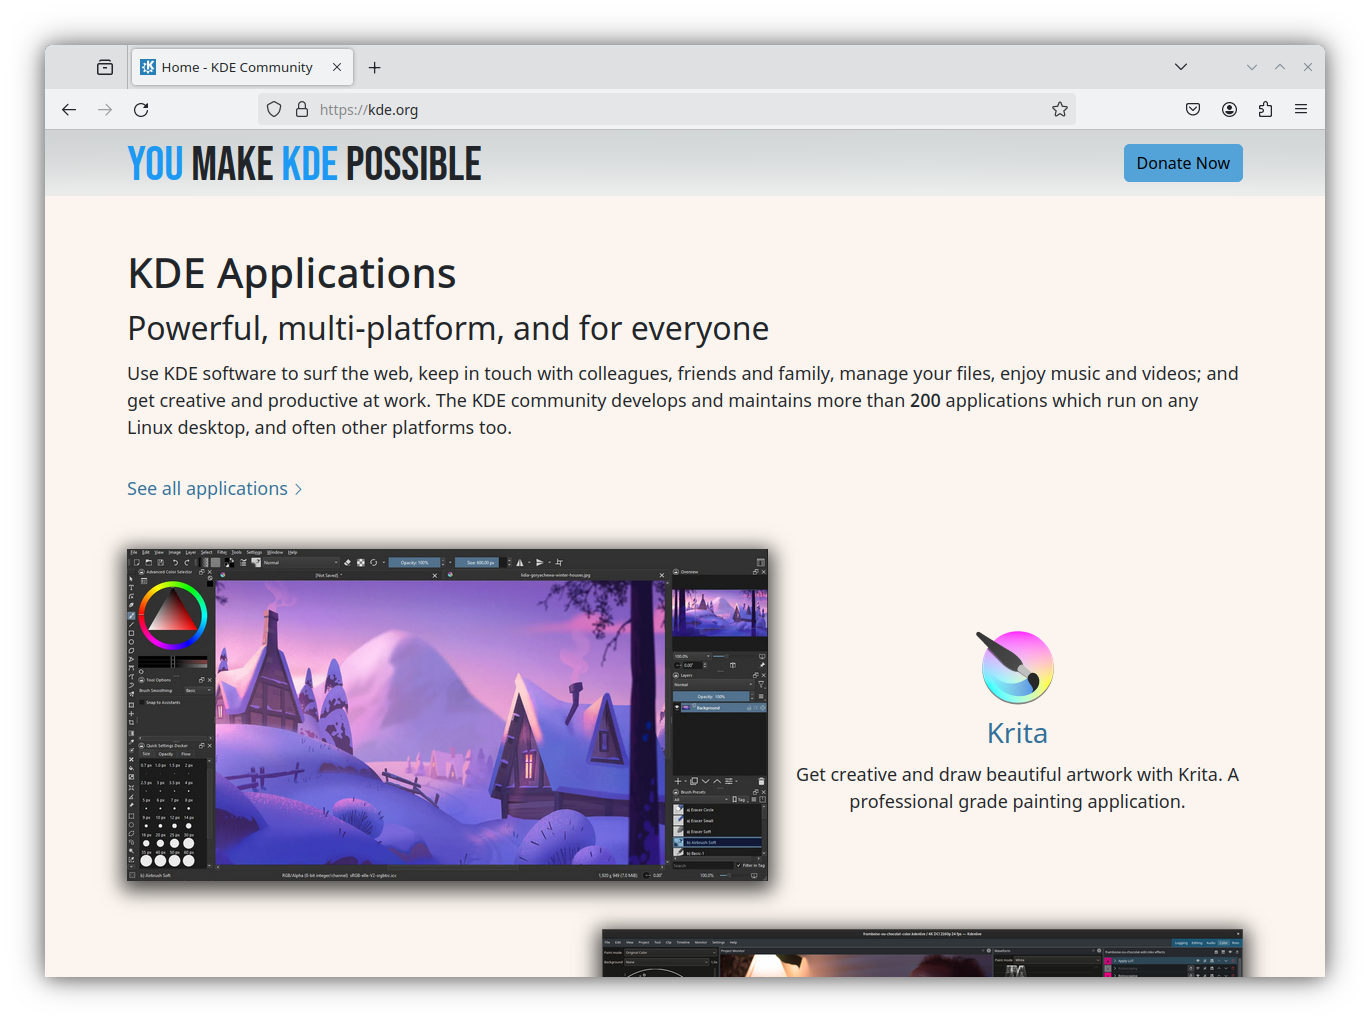 Surf the web with the Firefox web browser. Firefox is perfectly integrated with KDE's Plasma desktop, letting you control multimedia playback, volume, downloads and more from KDE's programs.